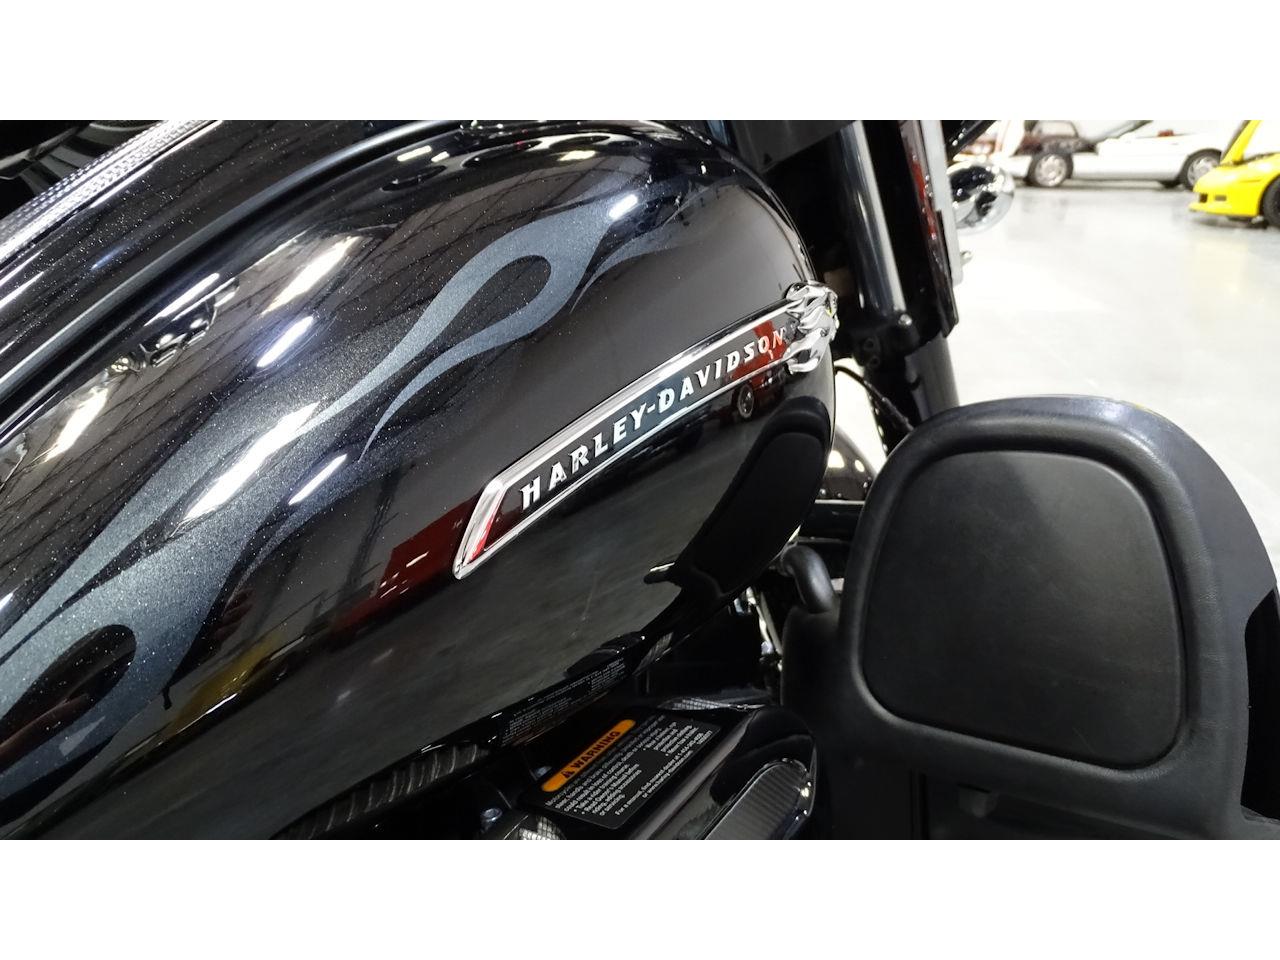 2015 Harley-Davidson Motorcycle for sale in O'Fallon, IL – photo 60